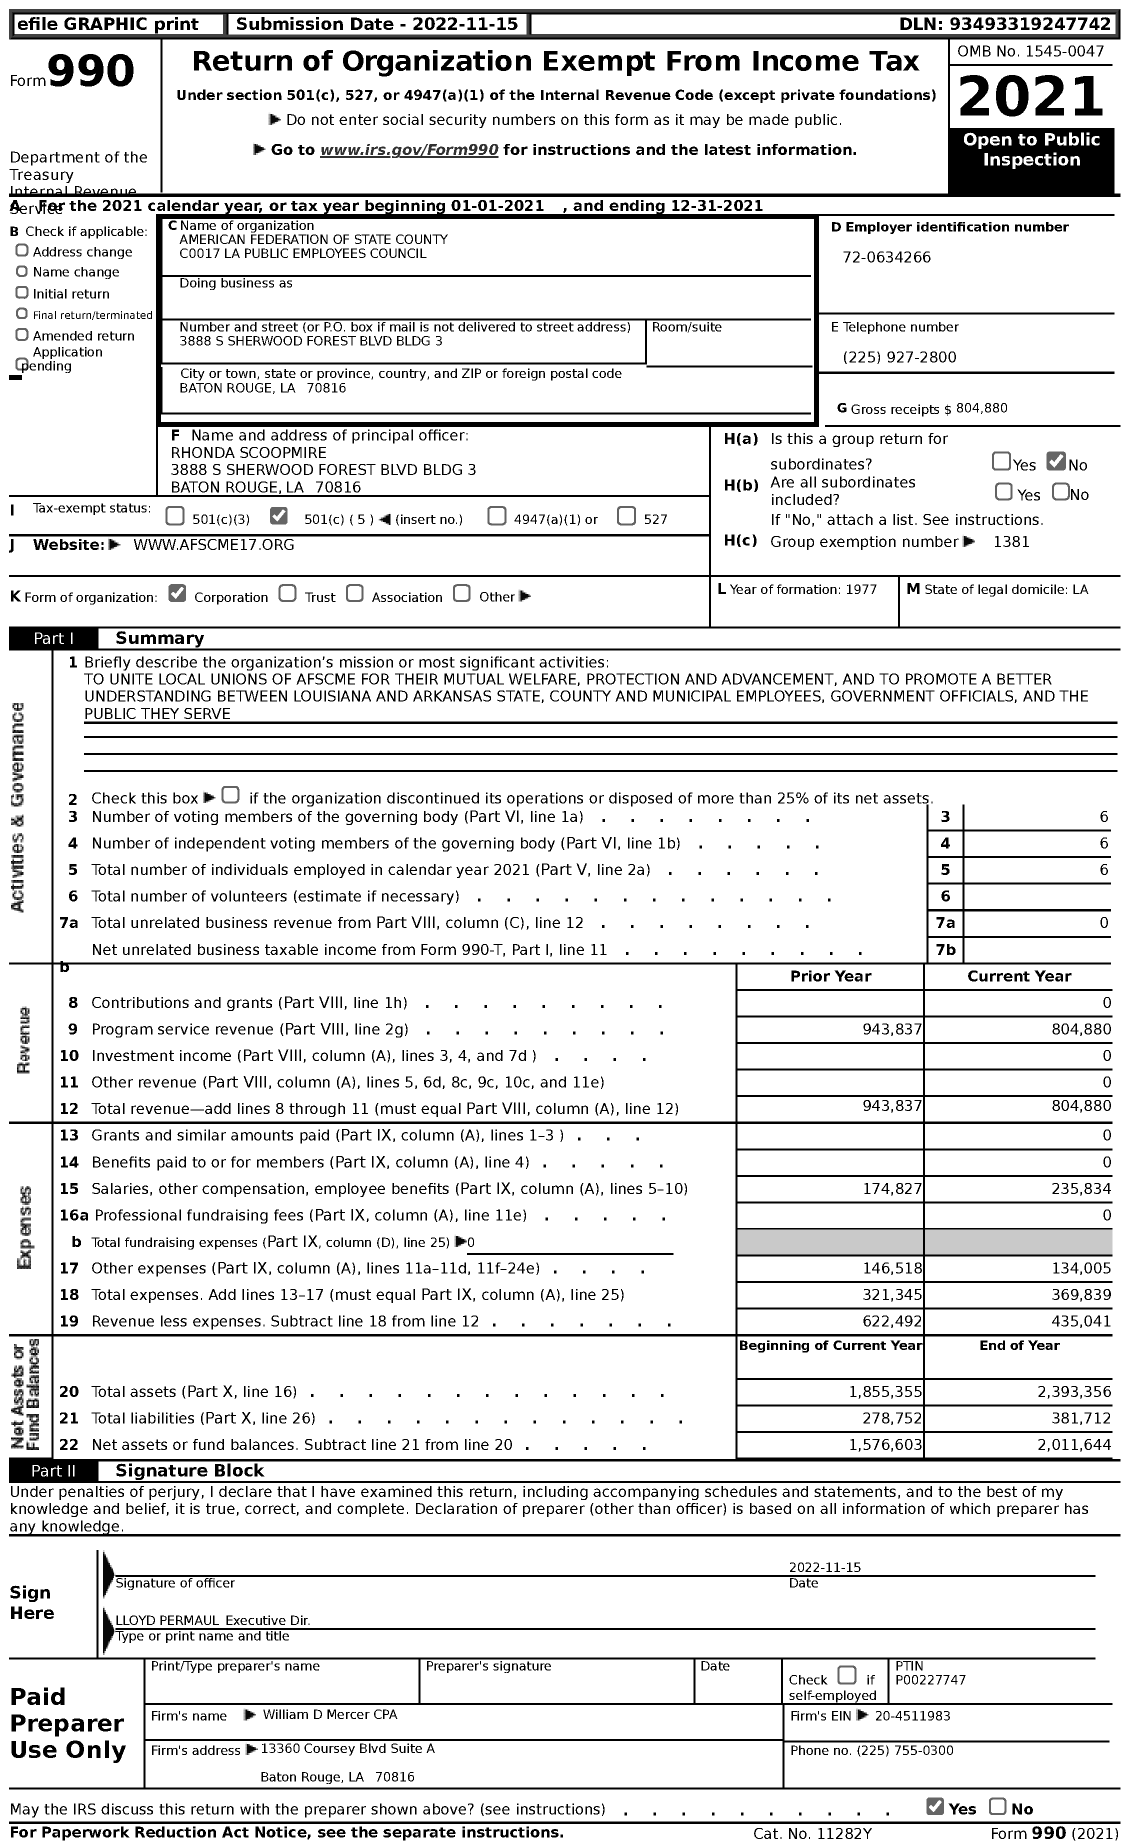 Image of first page of 2021 Form 990 for American Federation of State County & Municipal Employees - C0017la La Public Employees Council